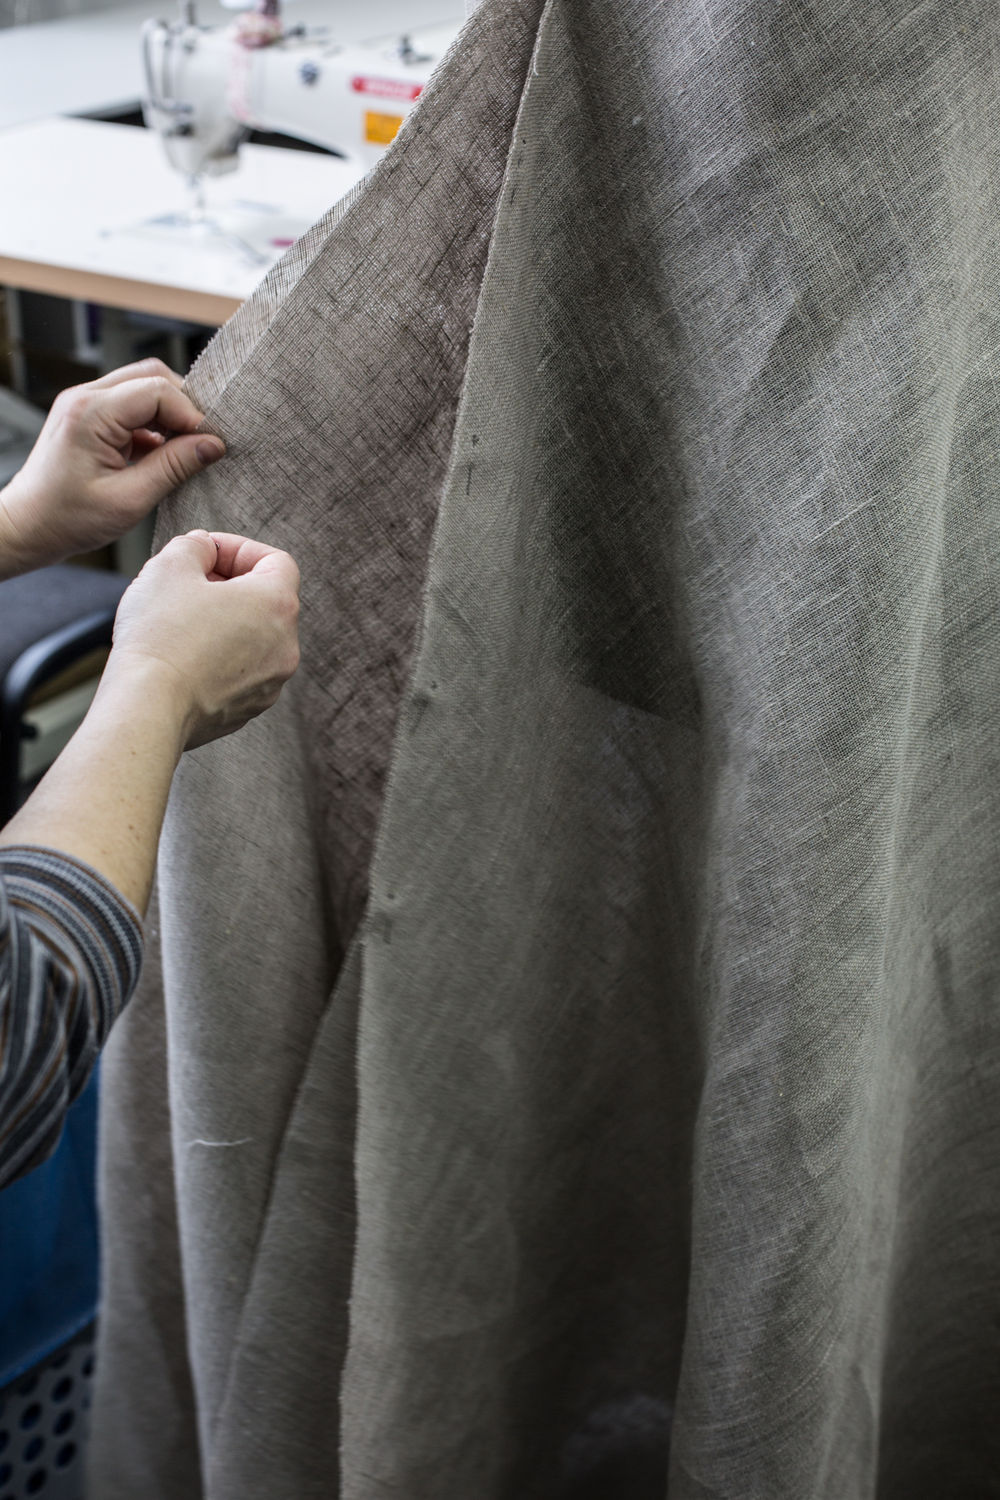 The creation of new sackcloth dress at ArmStreet